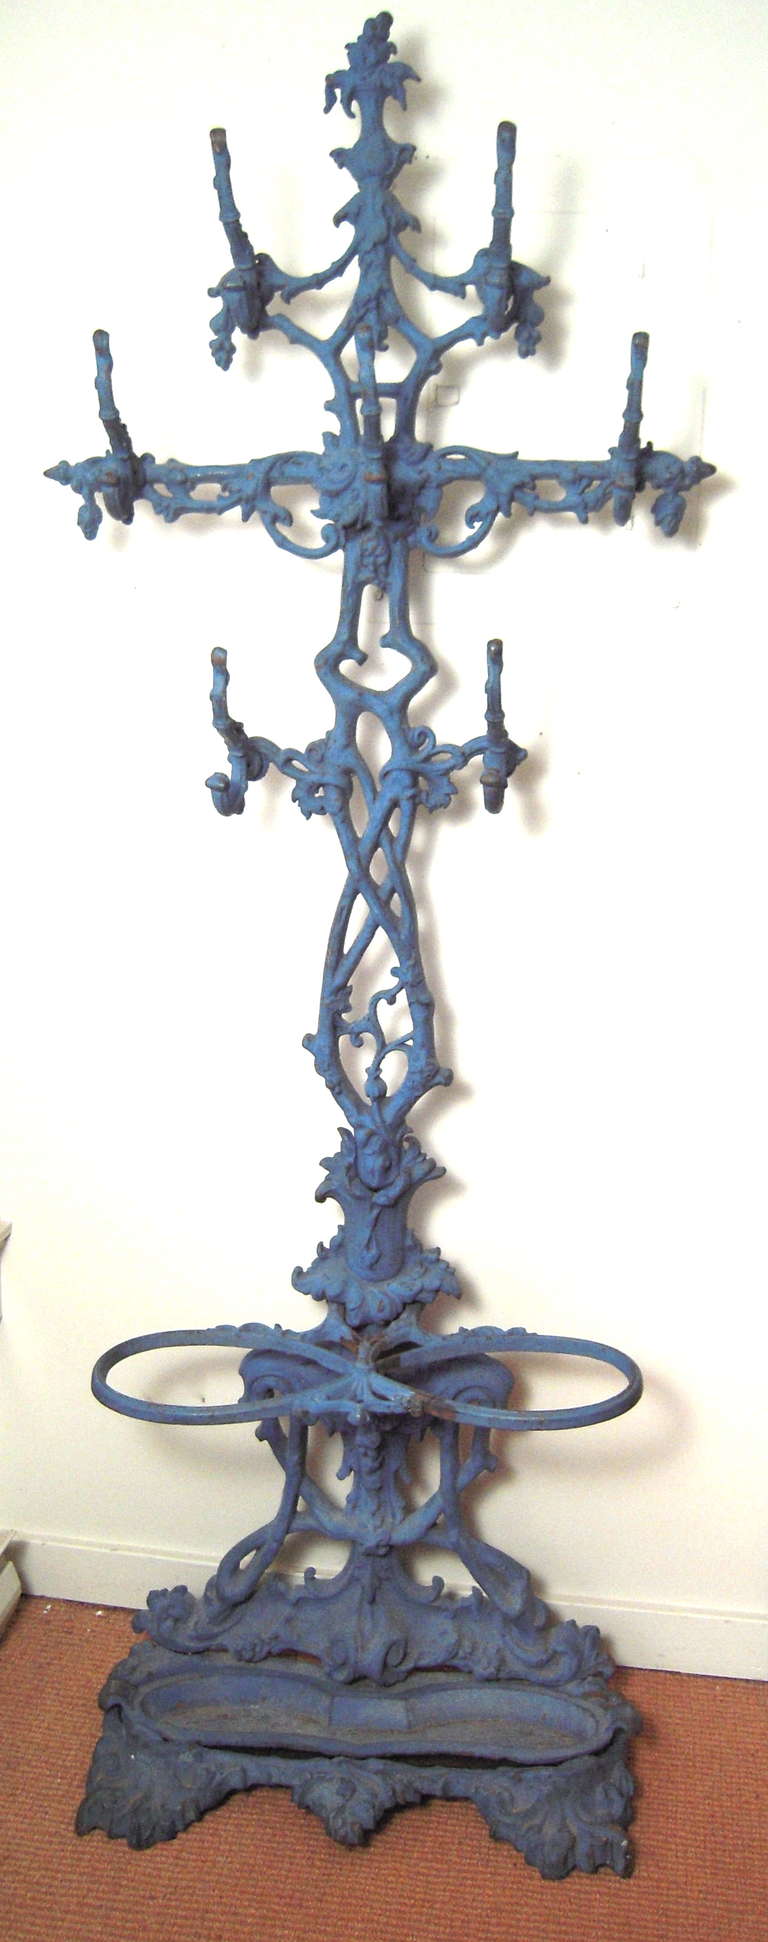 19th century blue painted cast iron hall tree with whimsical intertwined 'branch' support and hat and coat hooks, the base with loops to hold umbrellas and a drip pan.

In 2 sections which attach easily with screws.

